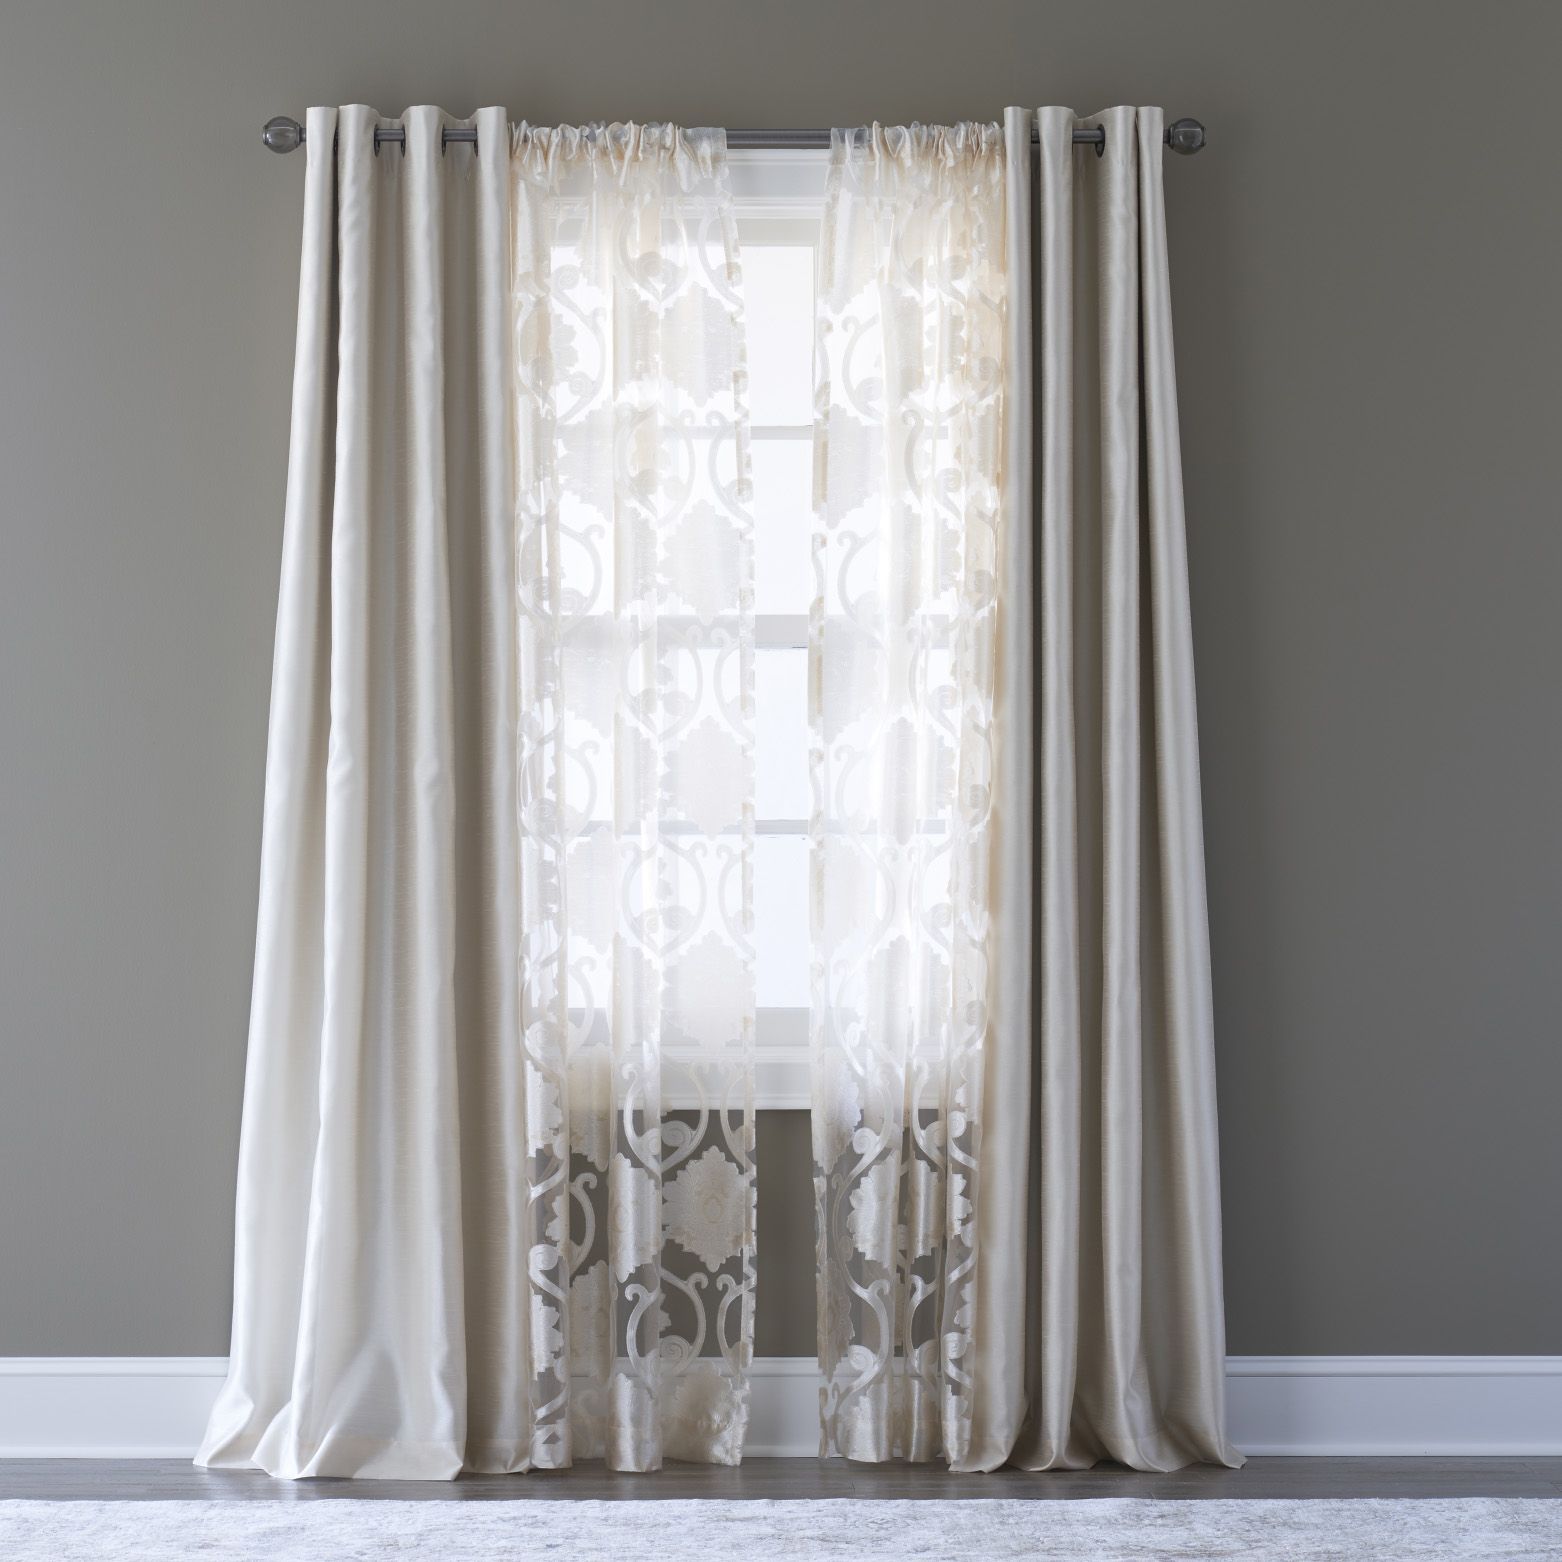 Window Treatments, How To Use A Valance With Curtains